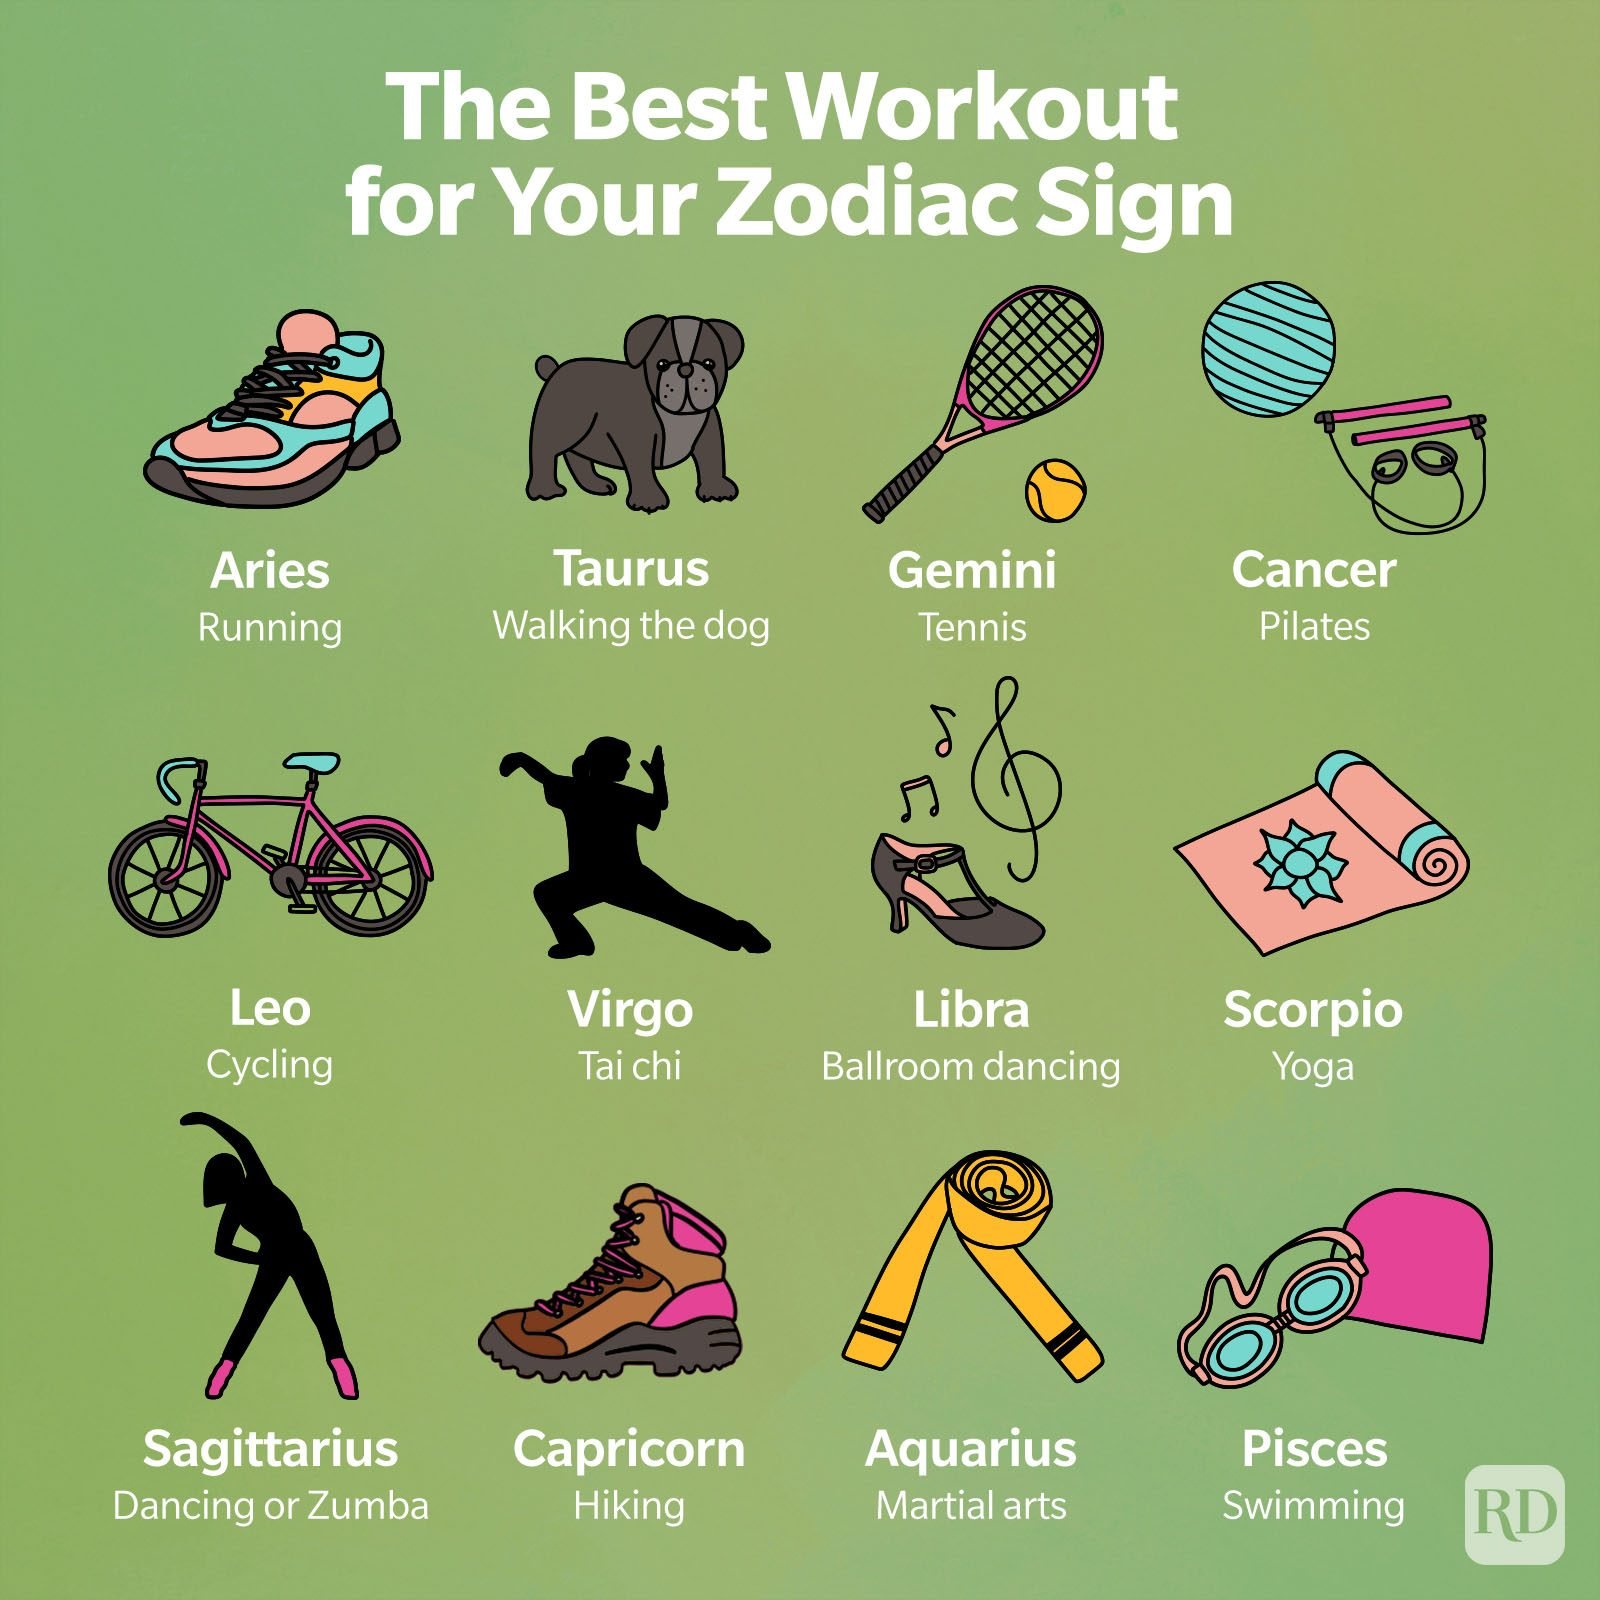 Find the Workout You'll Stick With, Based on Your Zodiac Sign